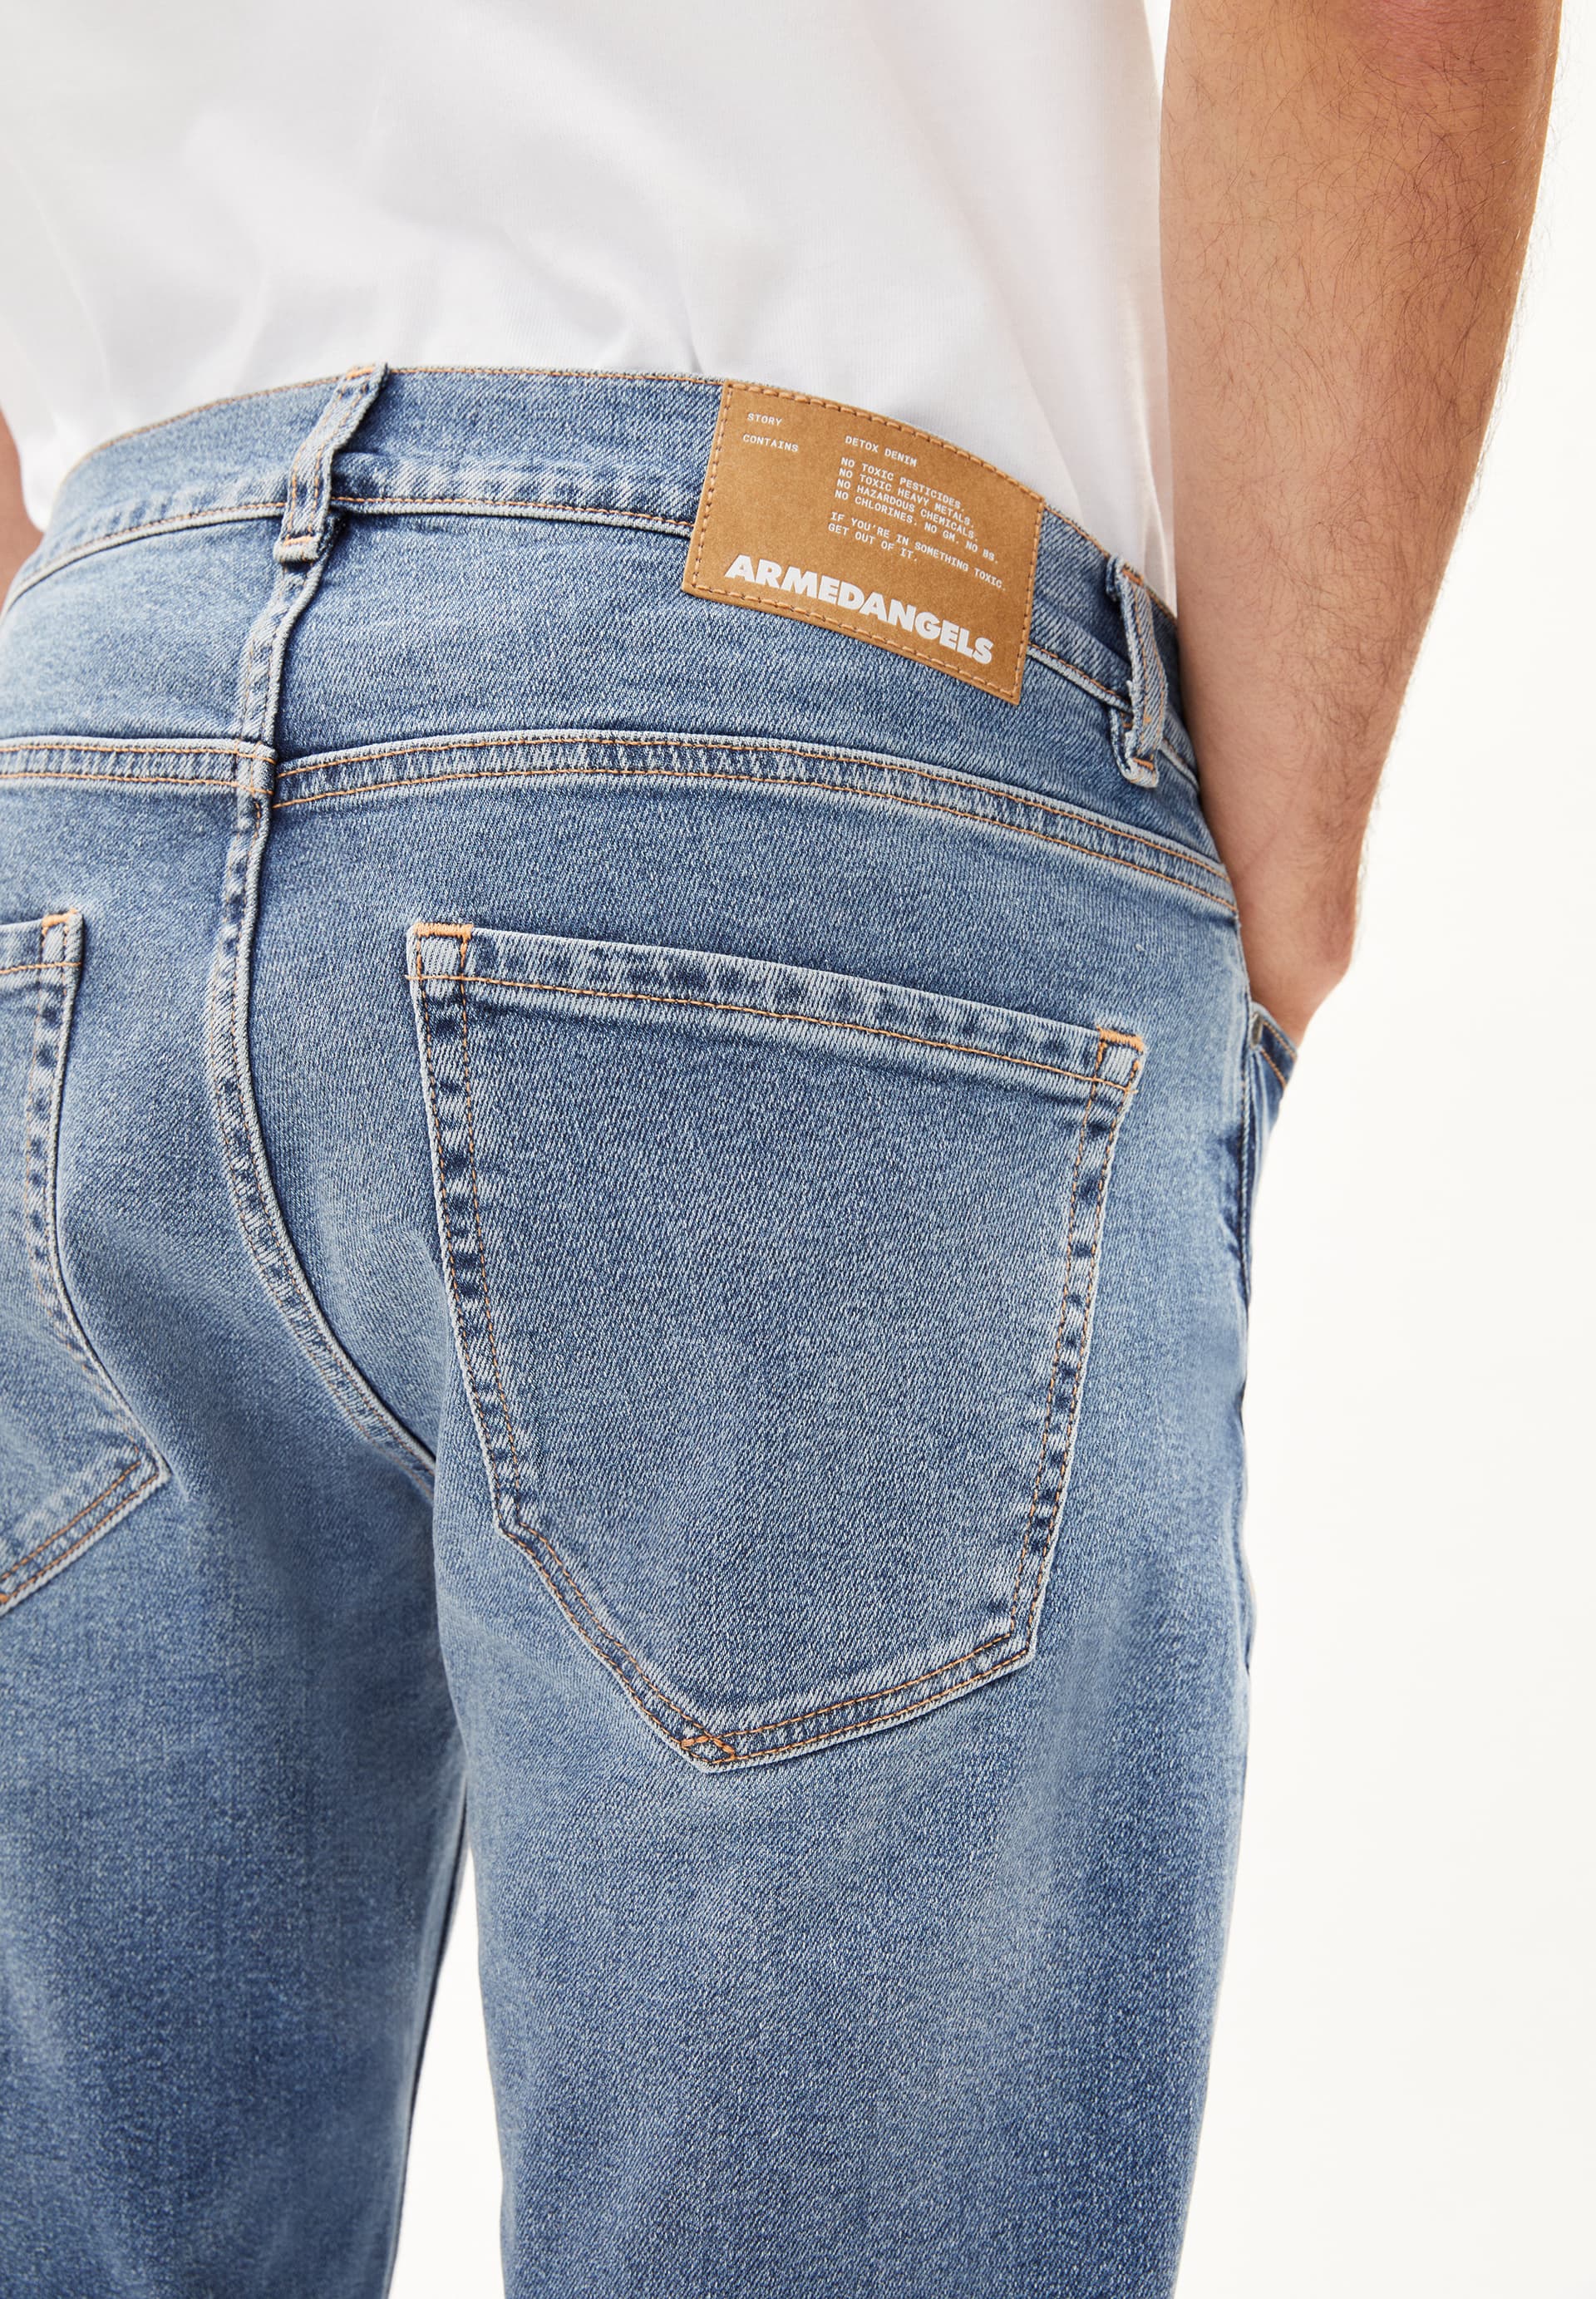 I sustainably I Fit Jeans produced Men more Slim ARMEDANGELS for